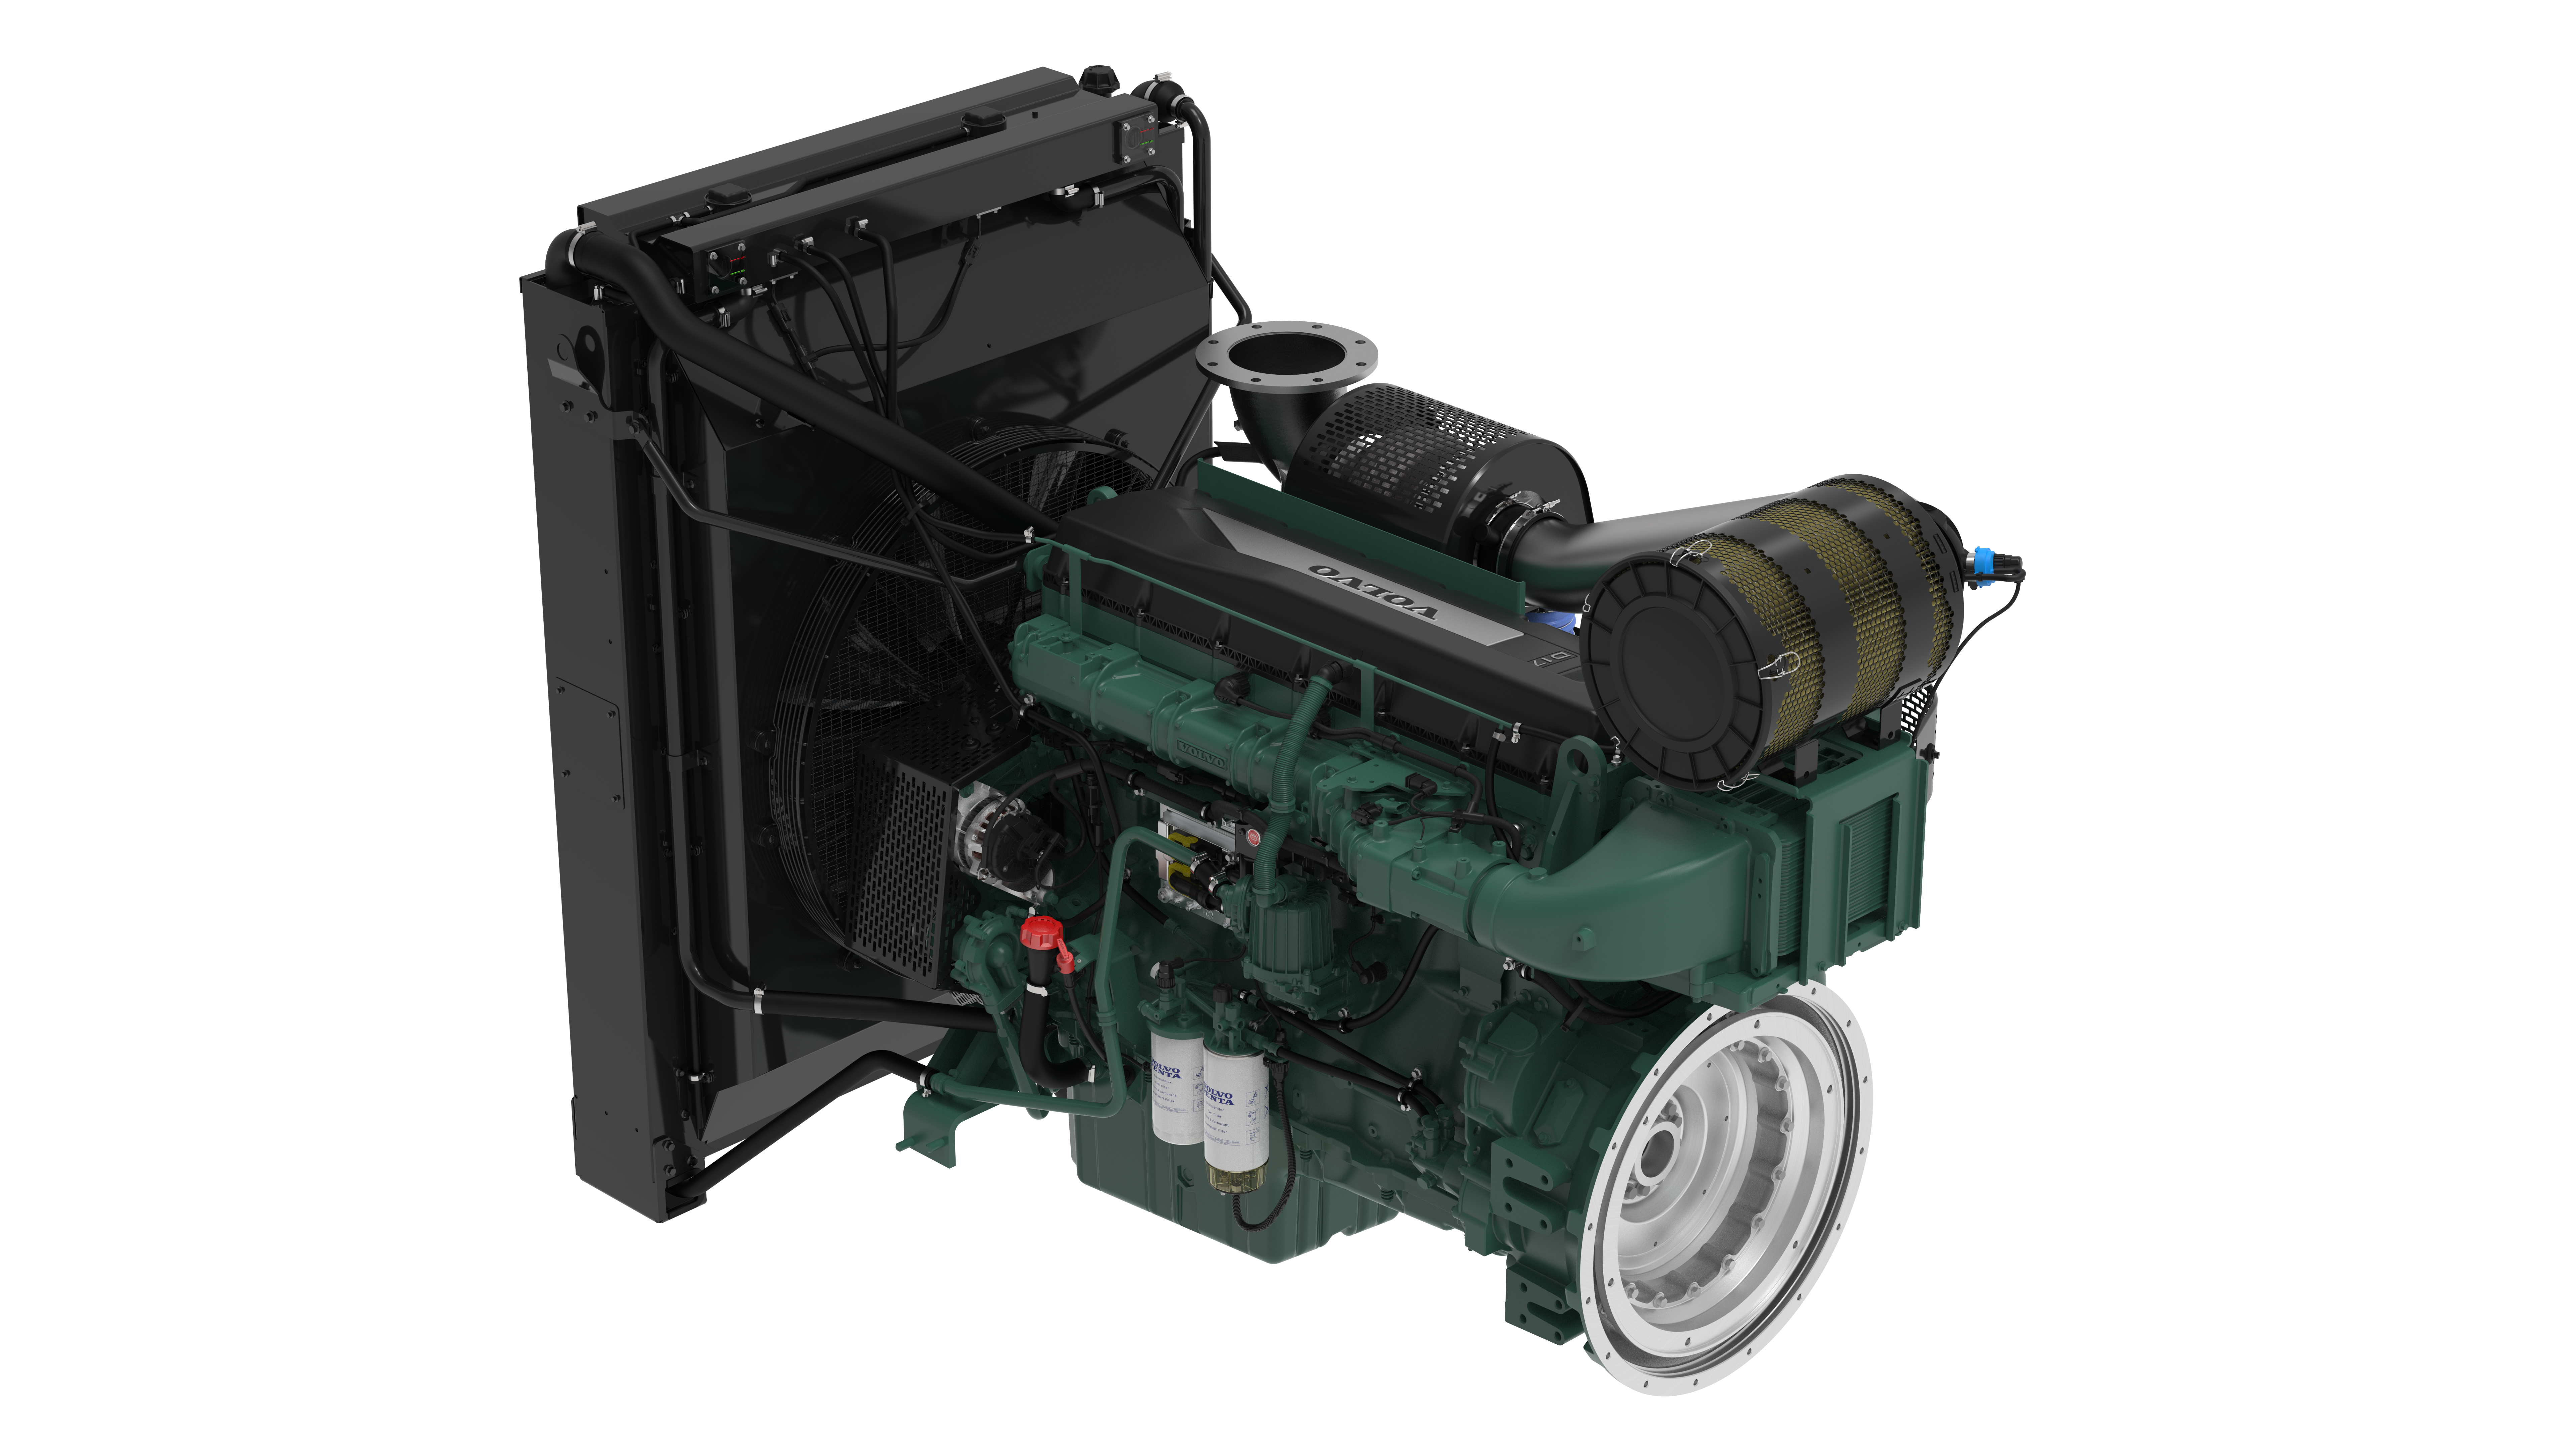 Volvo Penta has launched the D17 power generation engine.